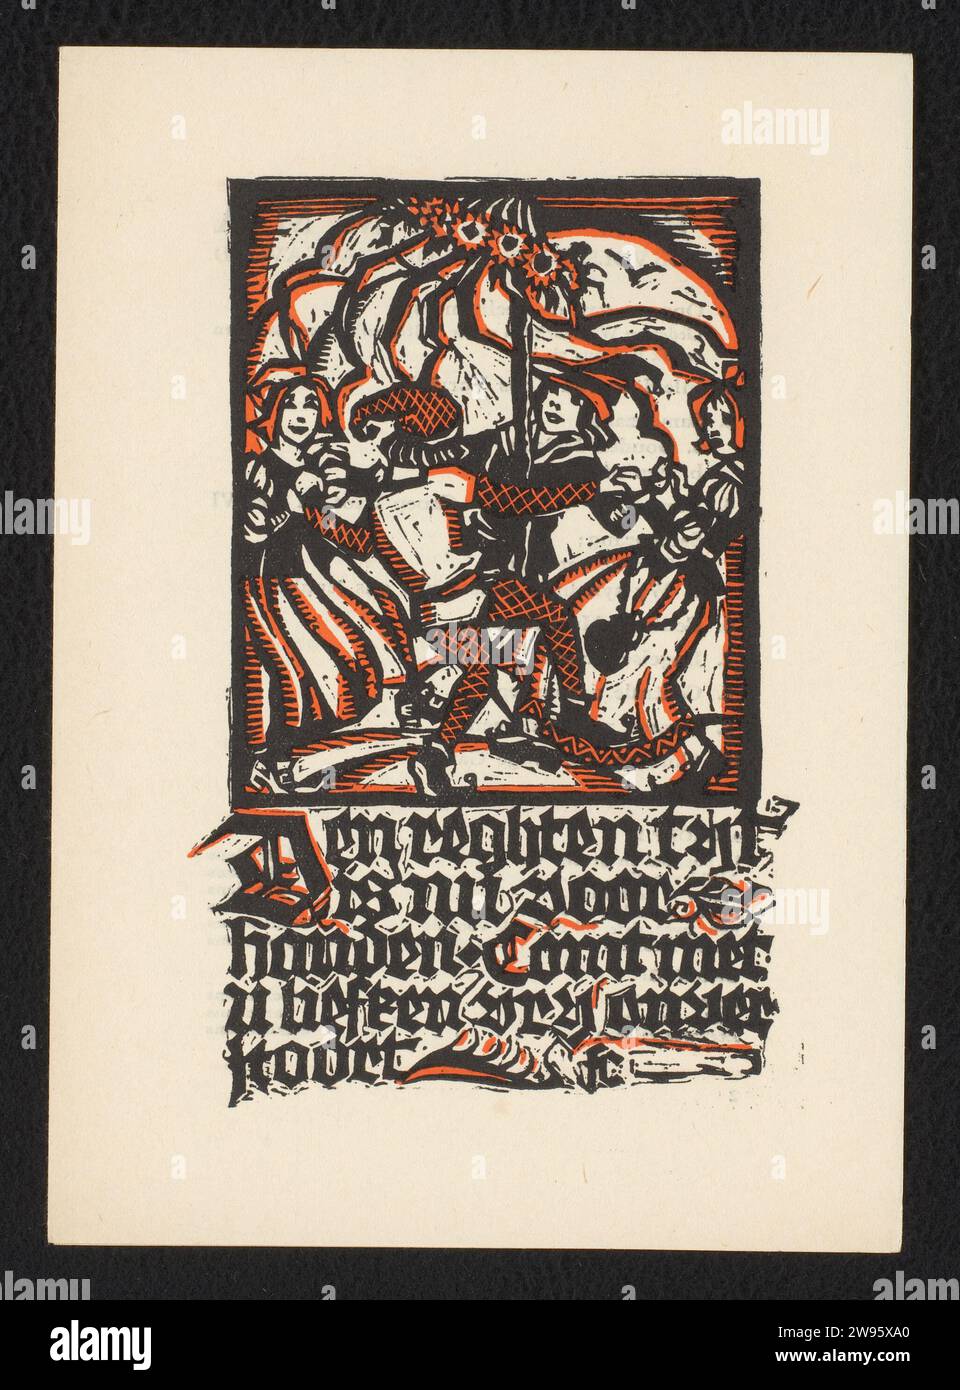 Program of the folk dance and folk singing evening, 'A.J.C. - Amsterdam department, Fré Cohen, Before 1930 print Two men and two women dance around a May tree. Below that the text: 'The Reghten Tijt is now available. Comt with you [...] fairly unbridled '. Twice folded sheet with the program of the day, the order of the dances and lyrics of some songs. The day took place on March 3, 1930 in the Concertgebouw of Amsterdam.  paper letterpress printing folk dancing (men and women together). dancing around the maypole concert hall Stock Photo